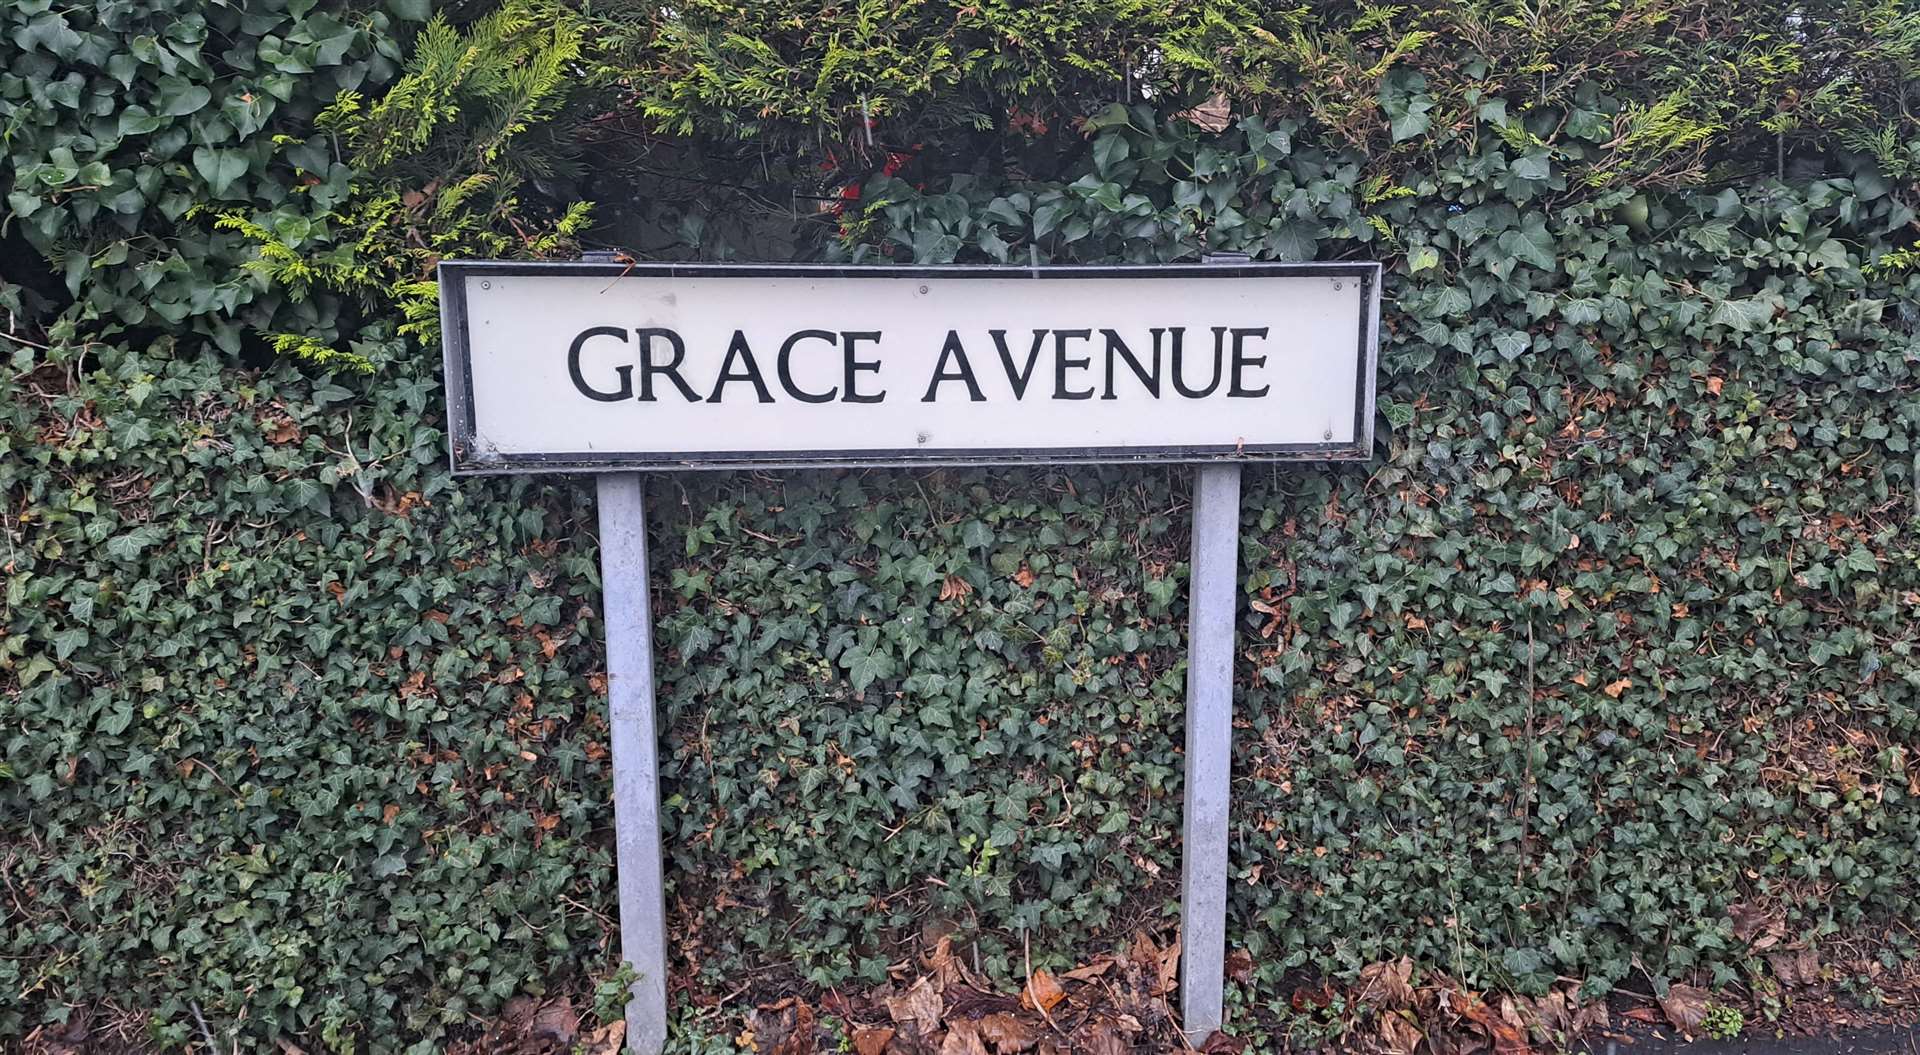 Existing Grace Avenue residents were not keen on the idea